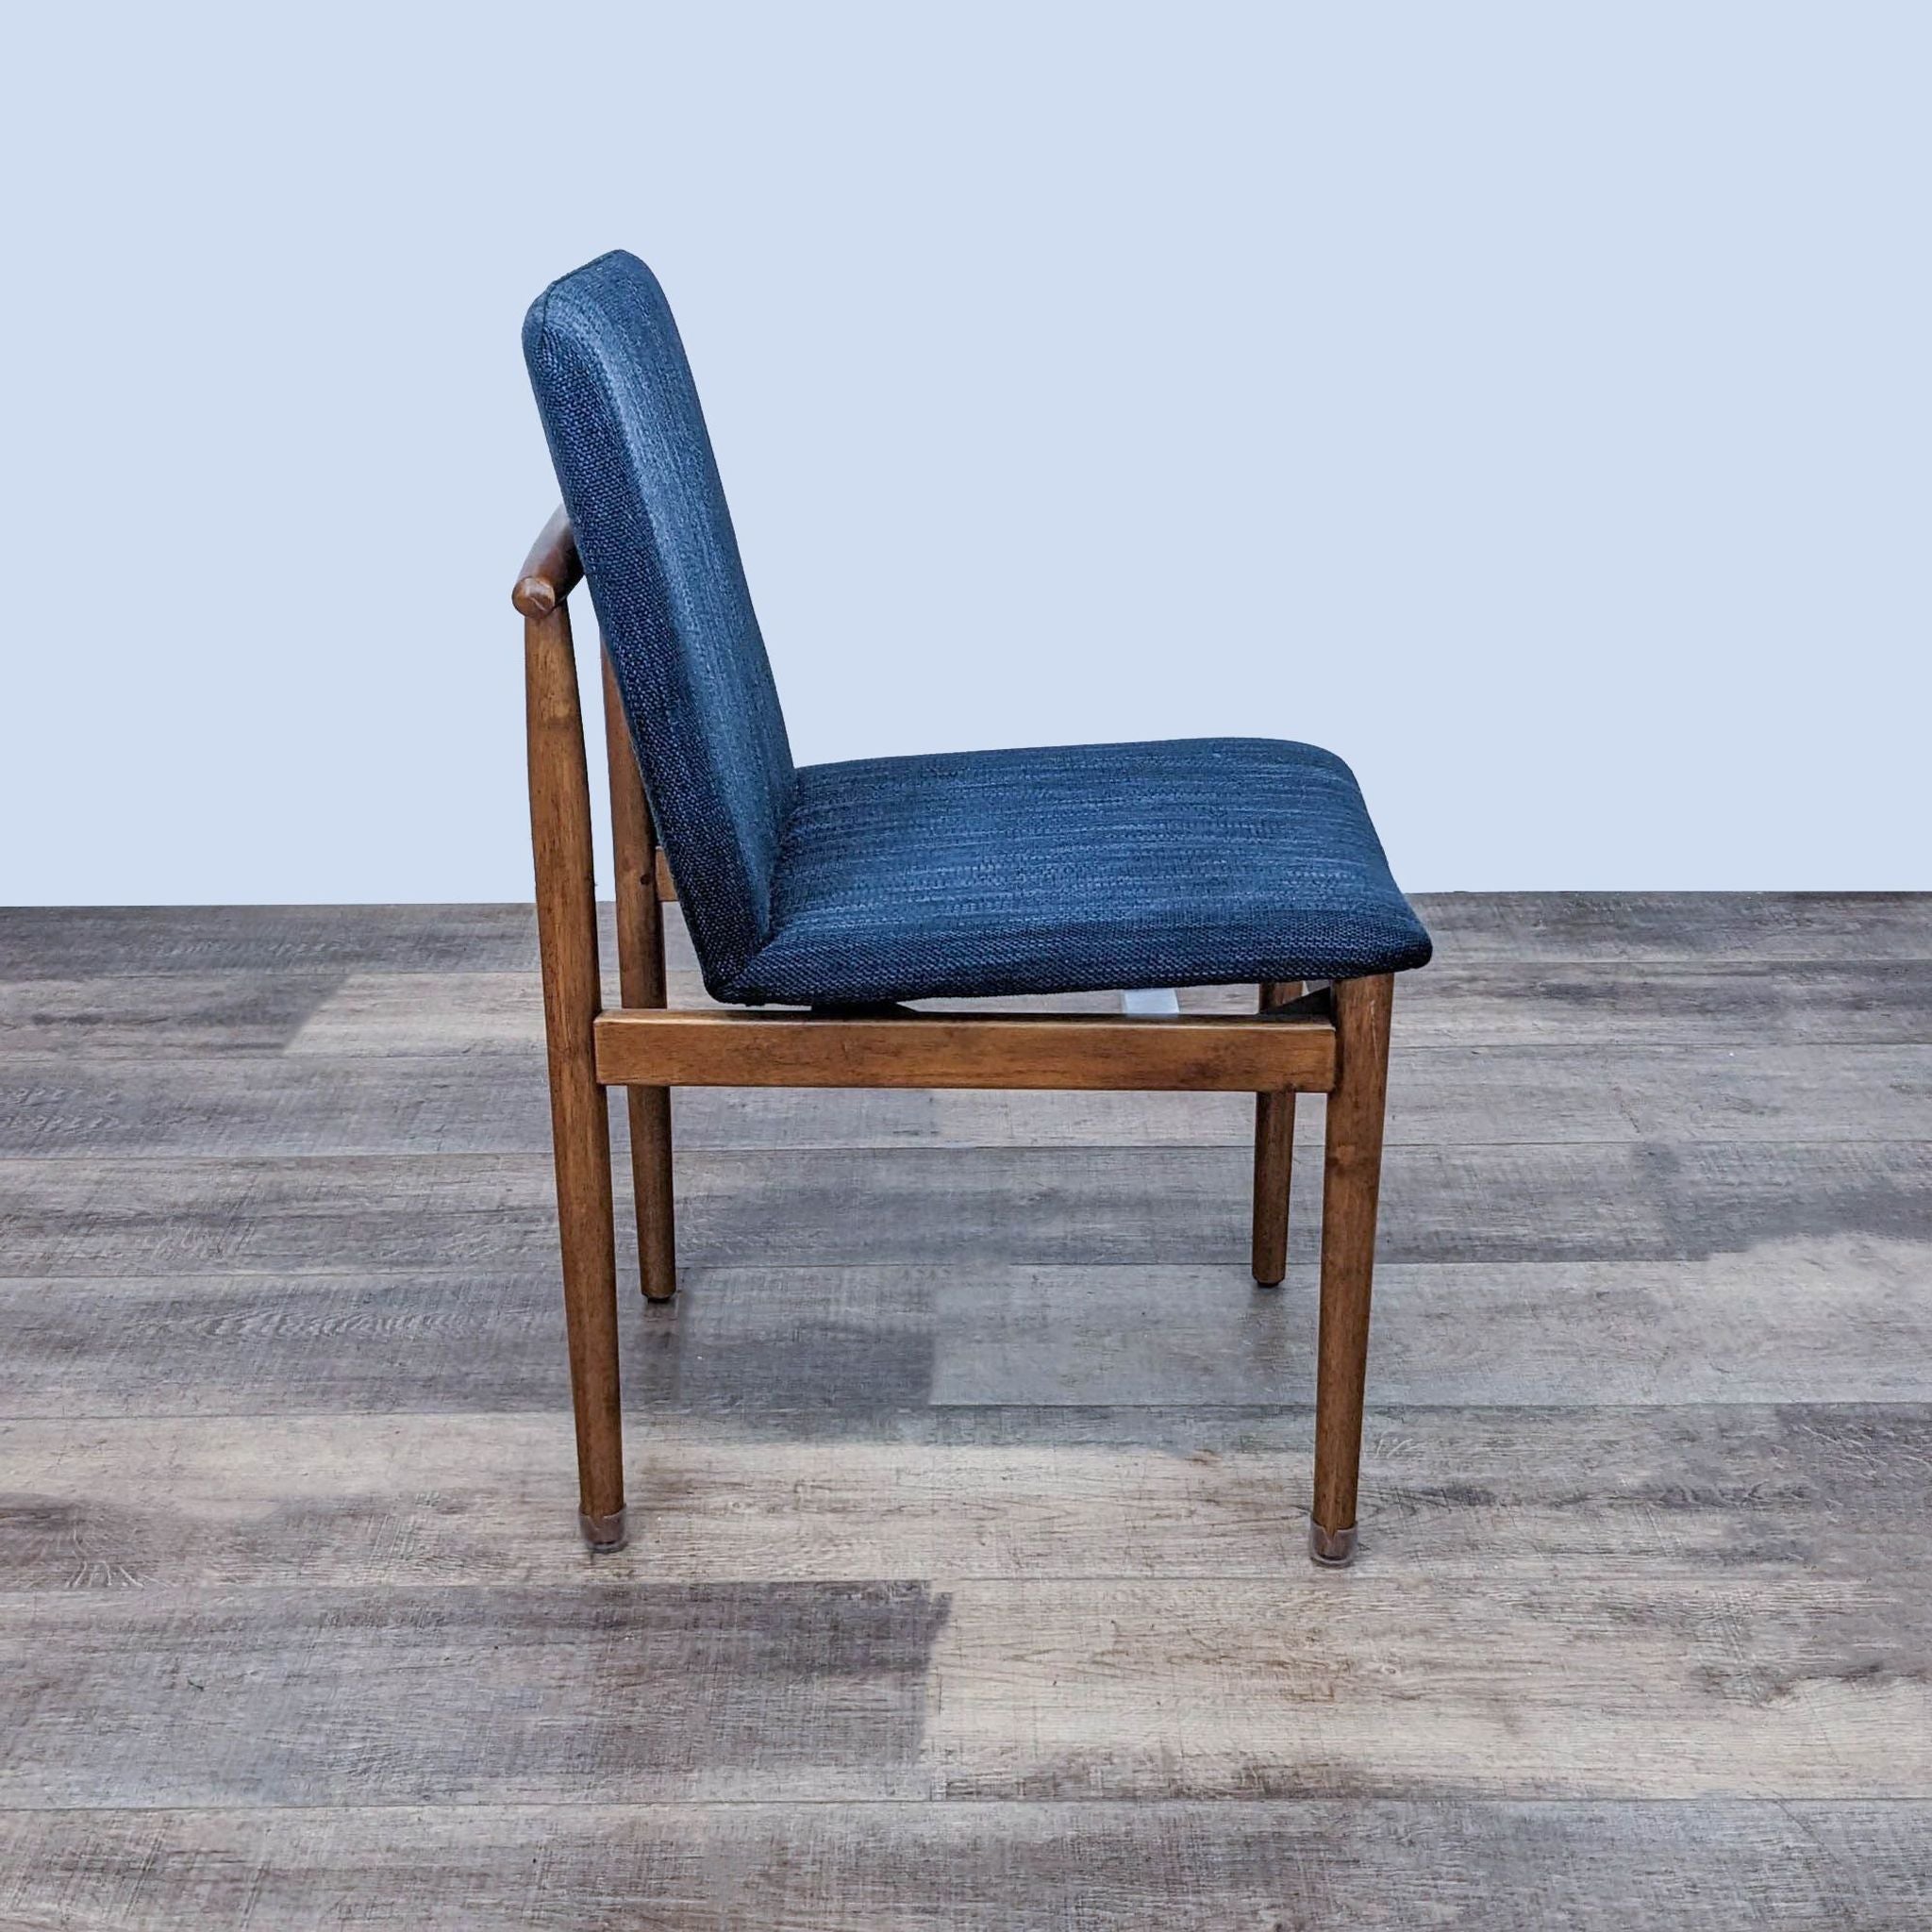 Side view of a West Elm Modern Framework dining chair, showcasing the double T-back detail and blue upholstered seat against a wooden floor background.